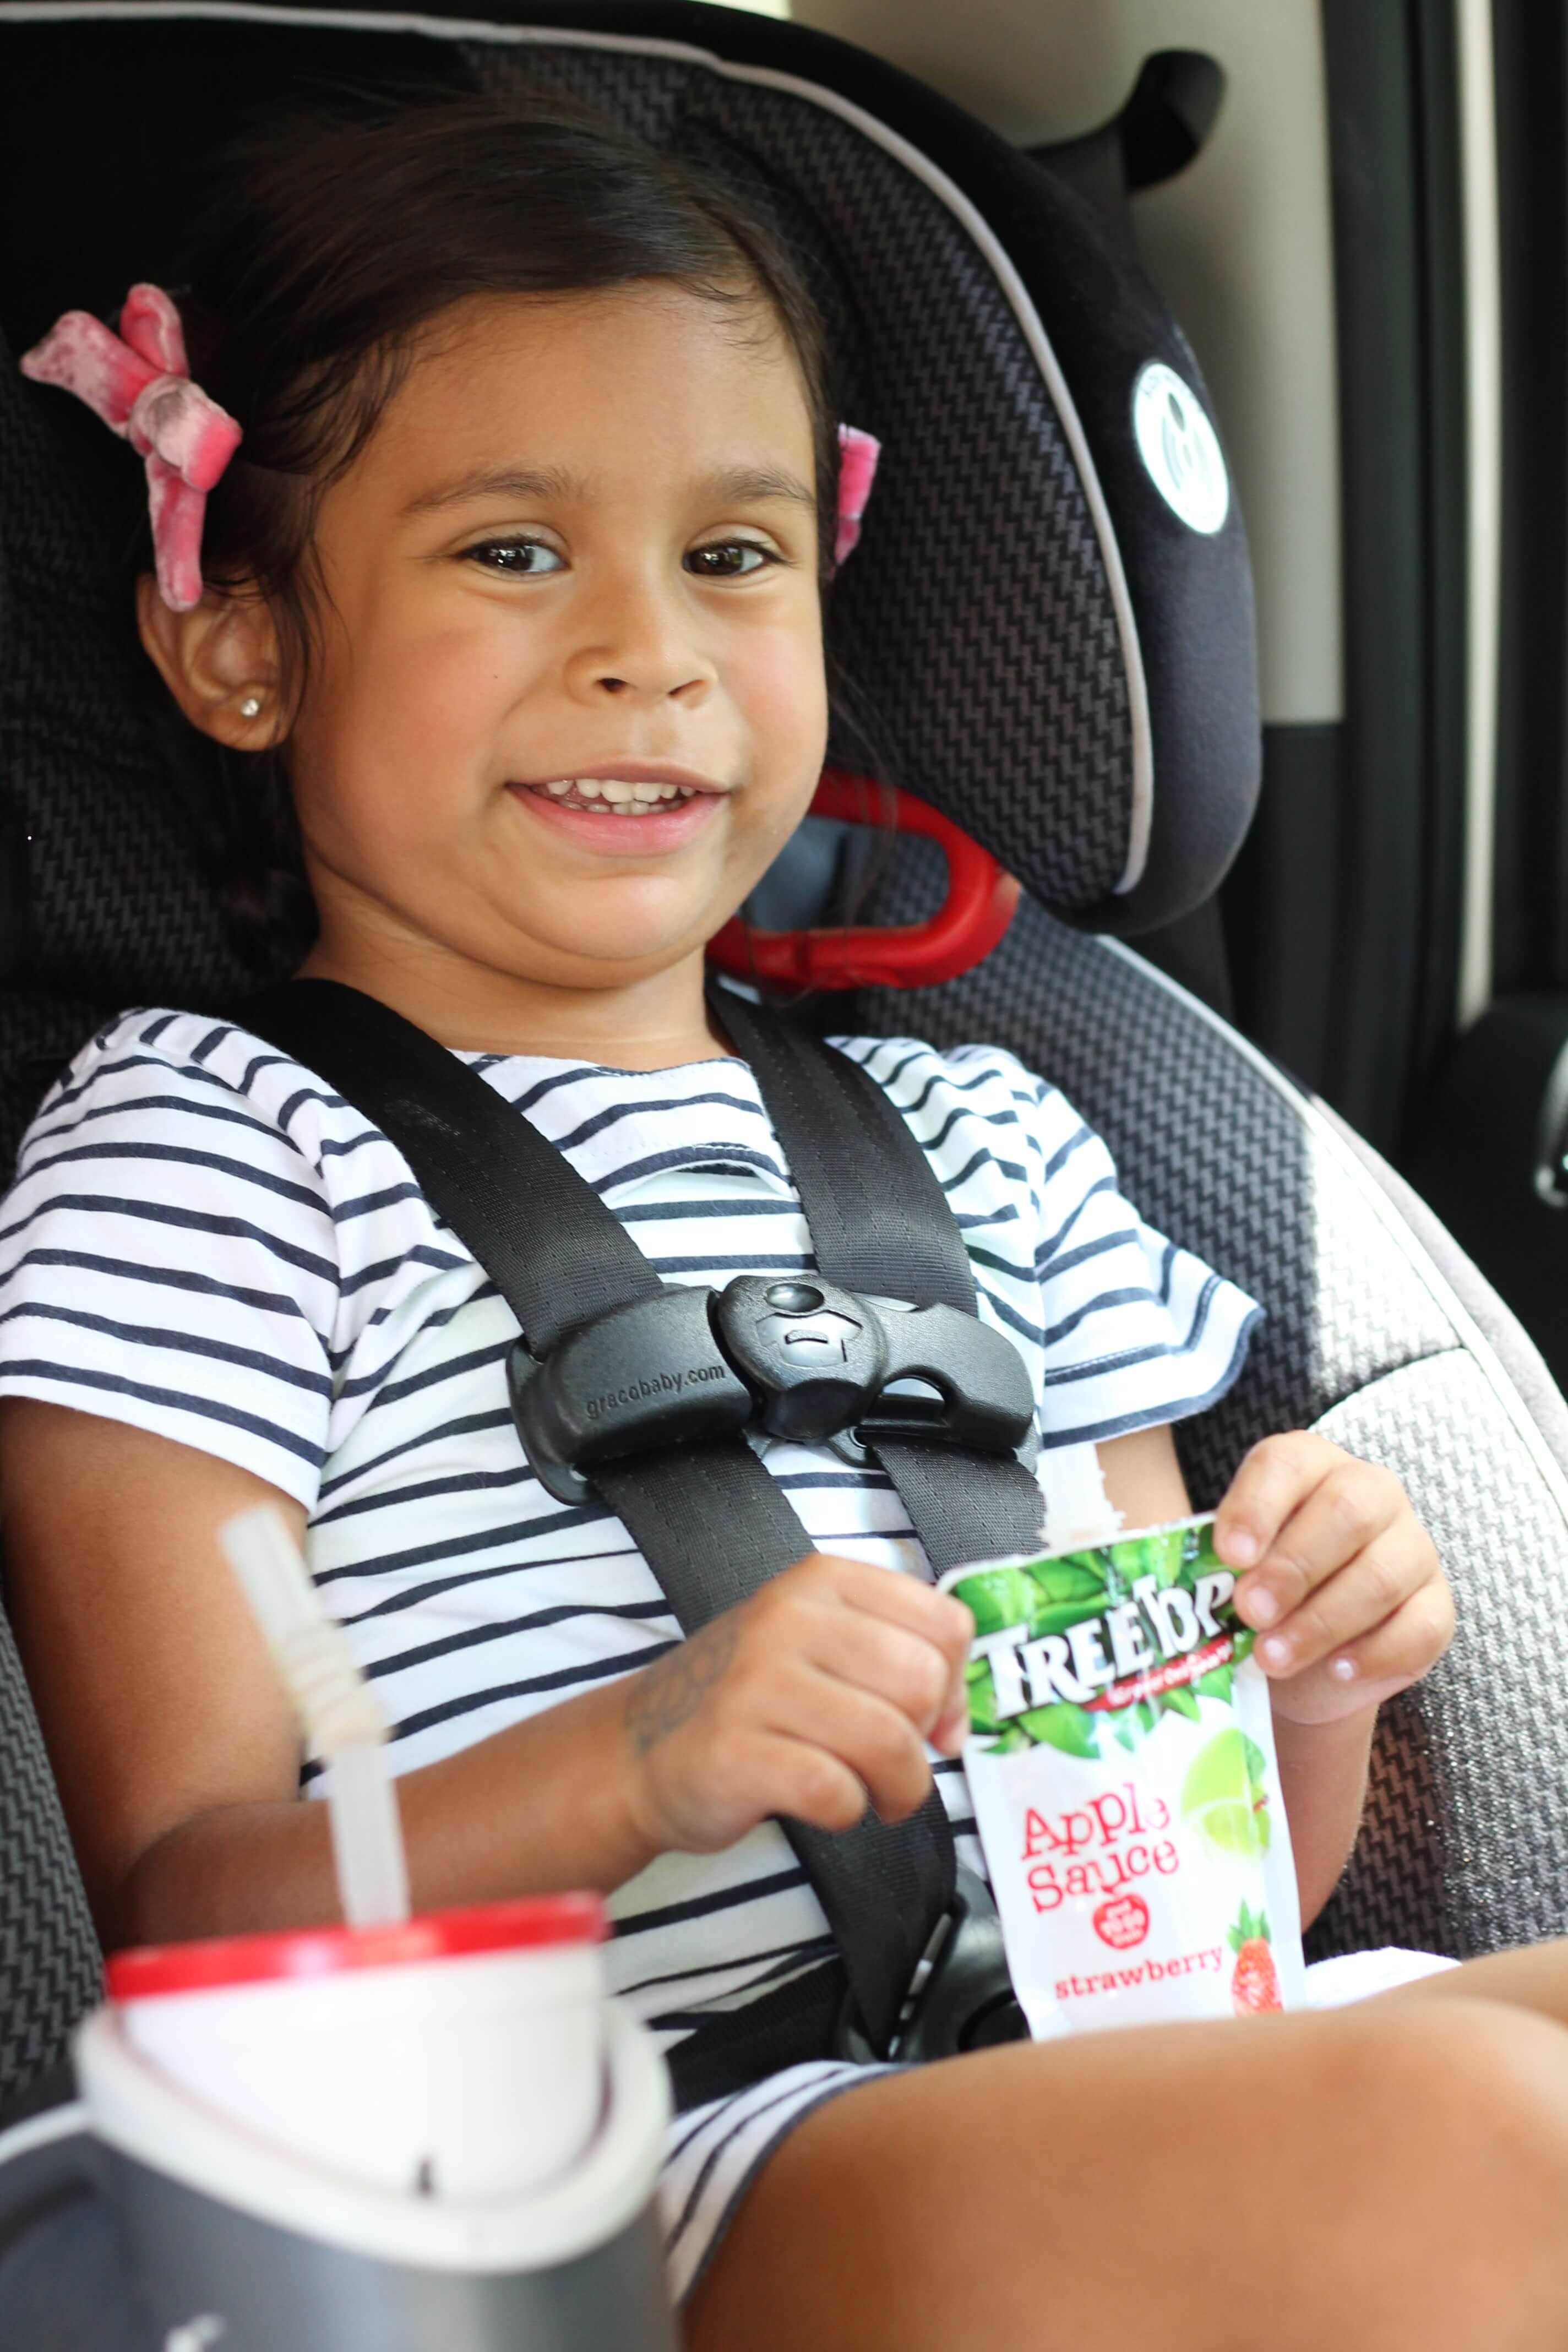 Grab some Tree Top apple sauce pouches and head out on an adventure! (AD) 